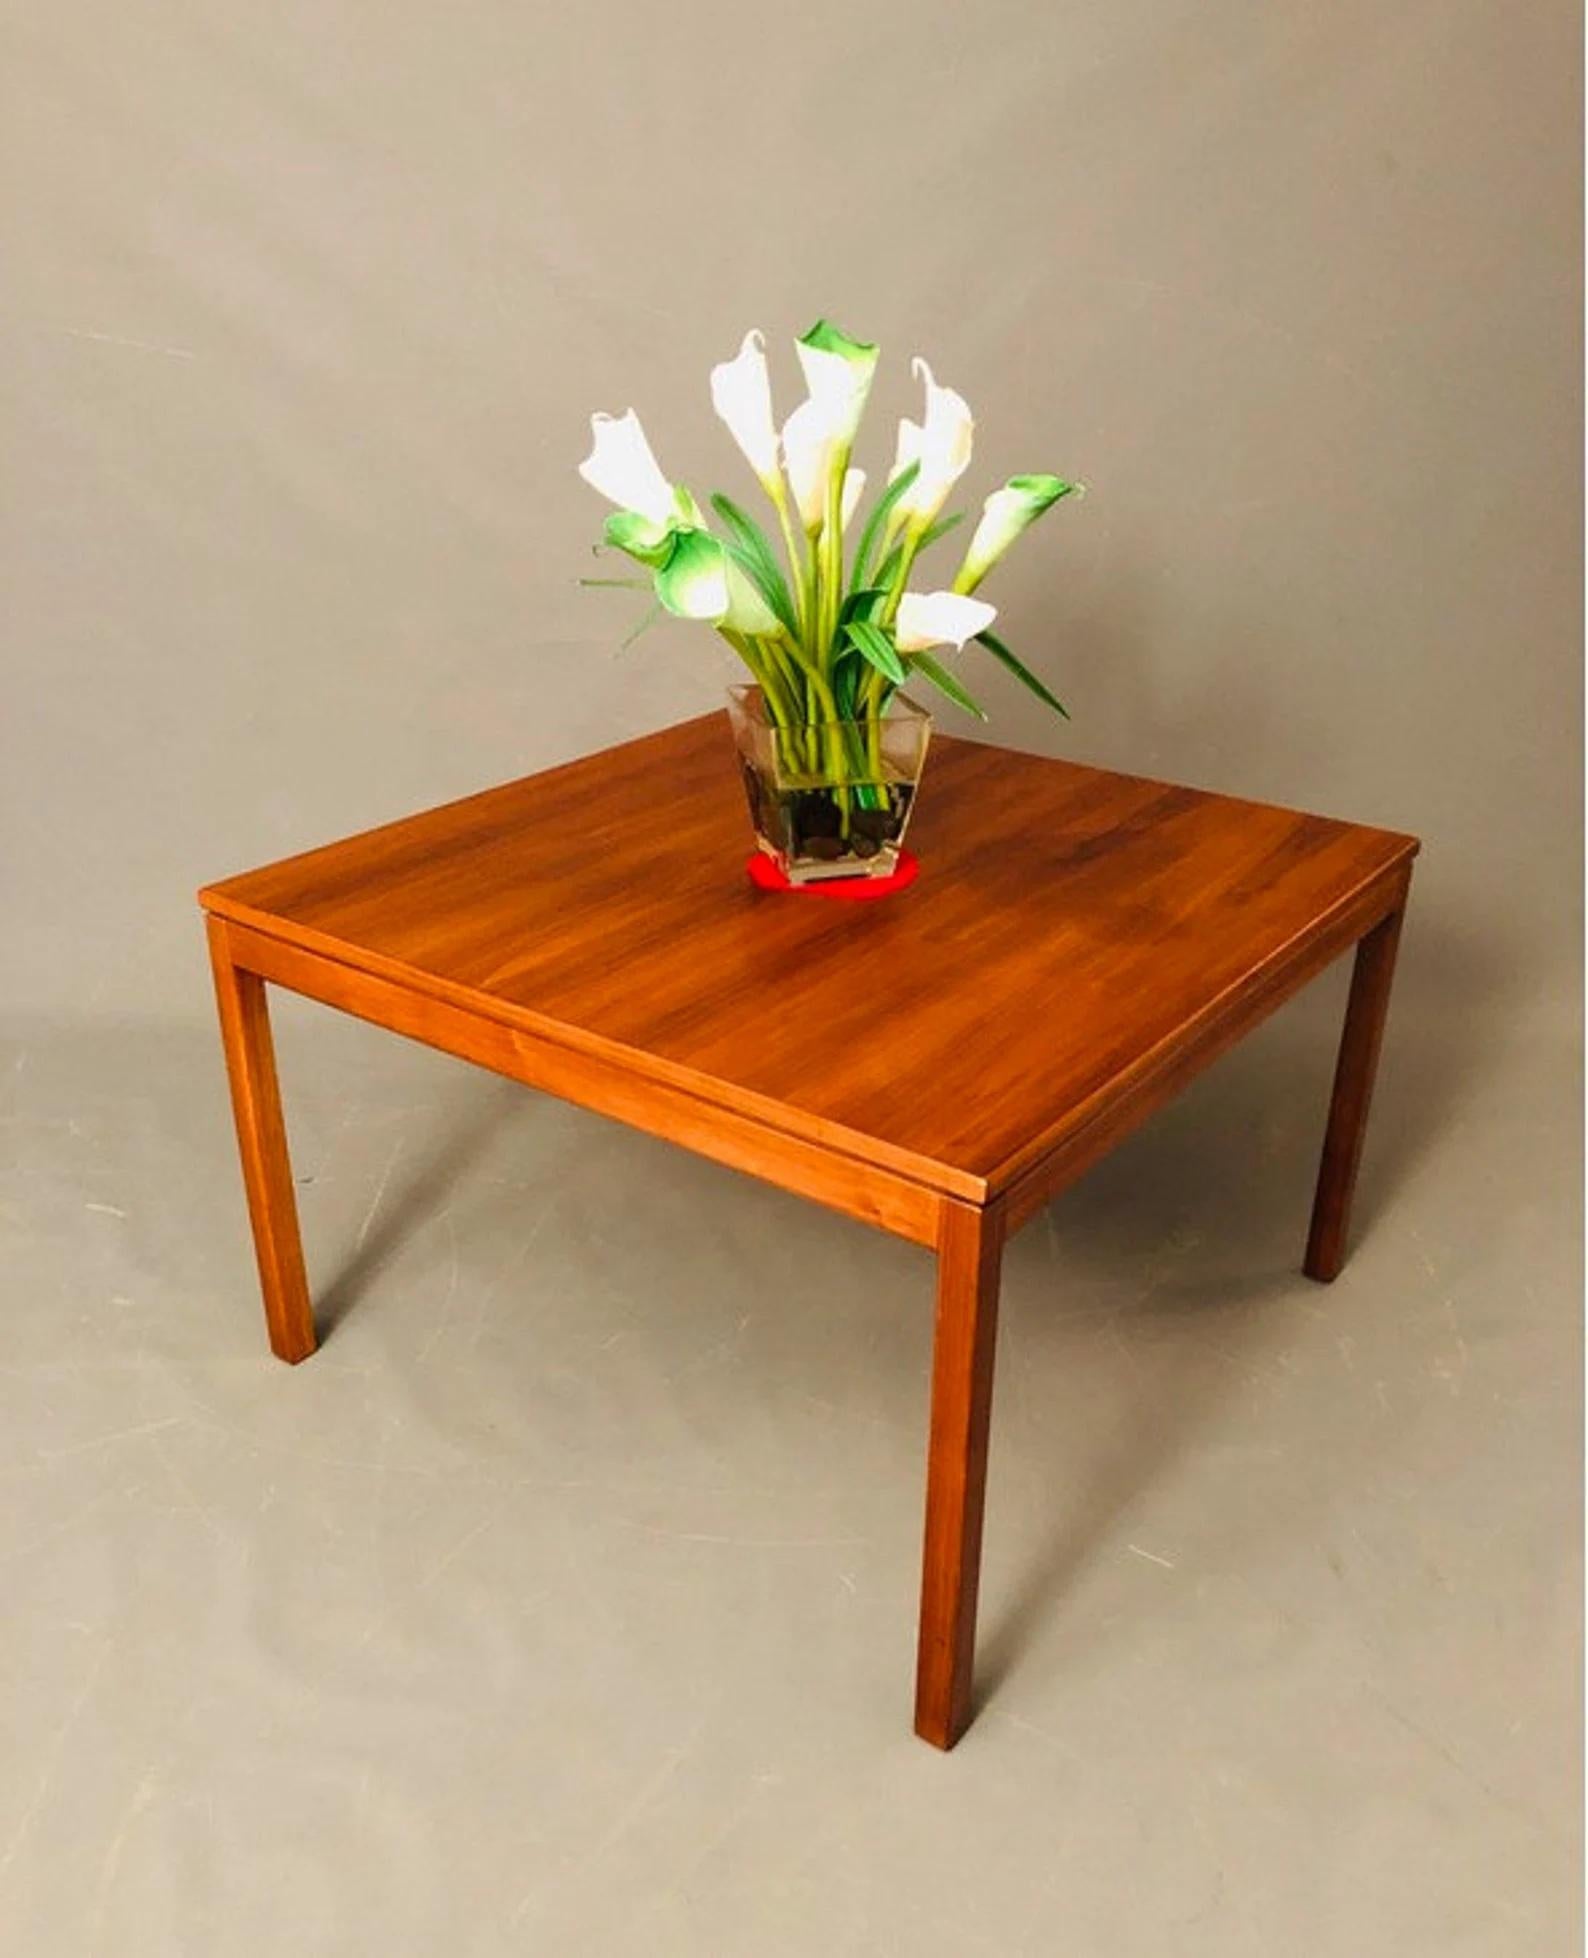 Beautiful mid-century square walnut coffee table by Jens Risom Co. with stunning wood grain was completely restored. Heavy and sturdy and ready for a new home.

Dimensions:
32” x 32” inches.
Height: 20” inches.